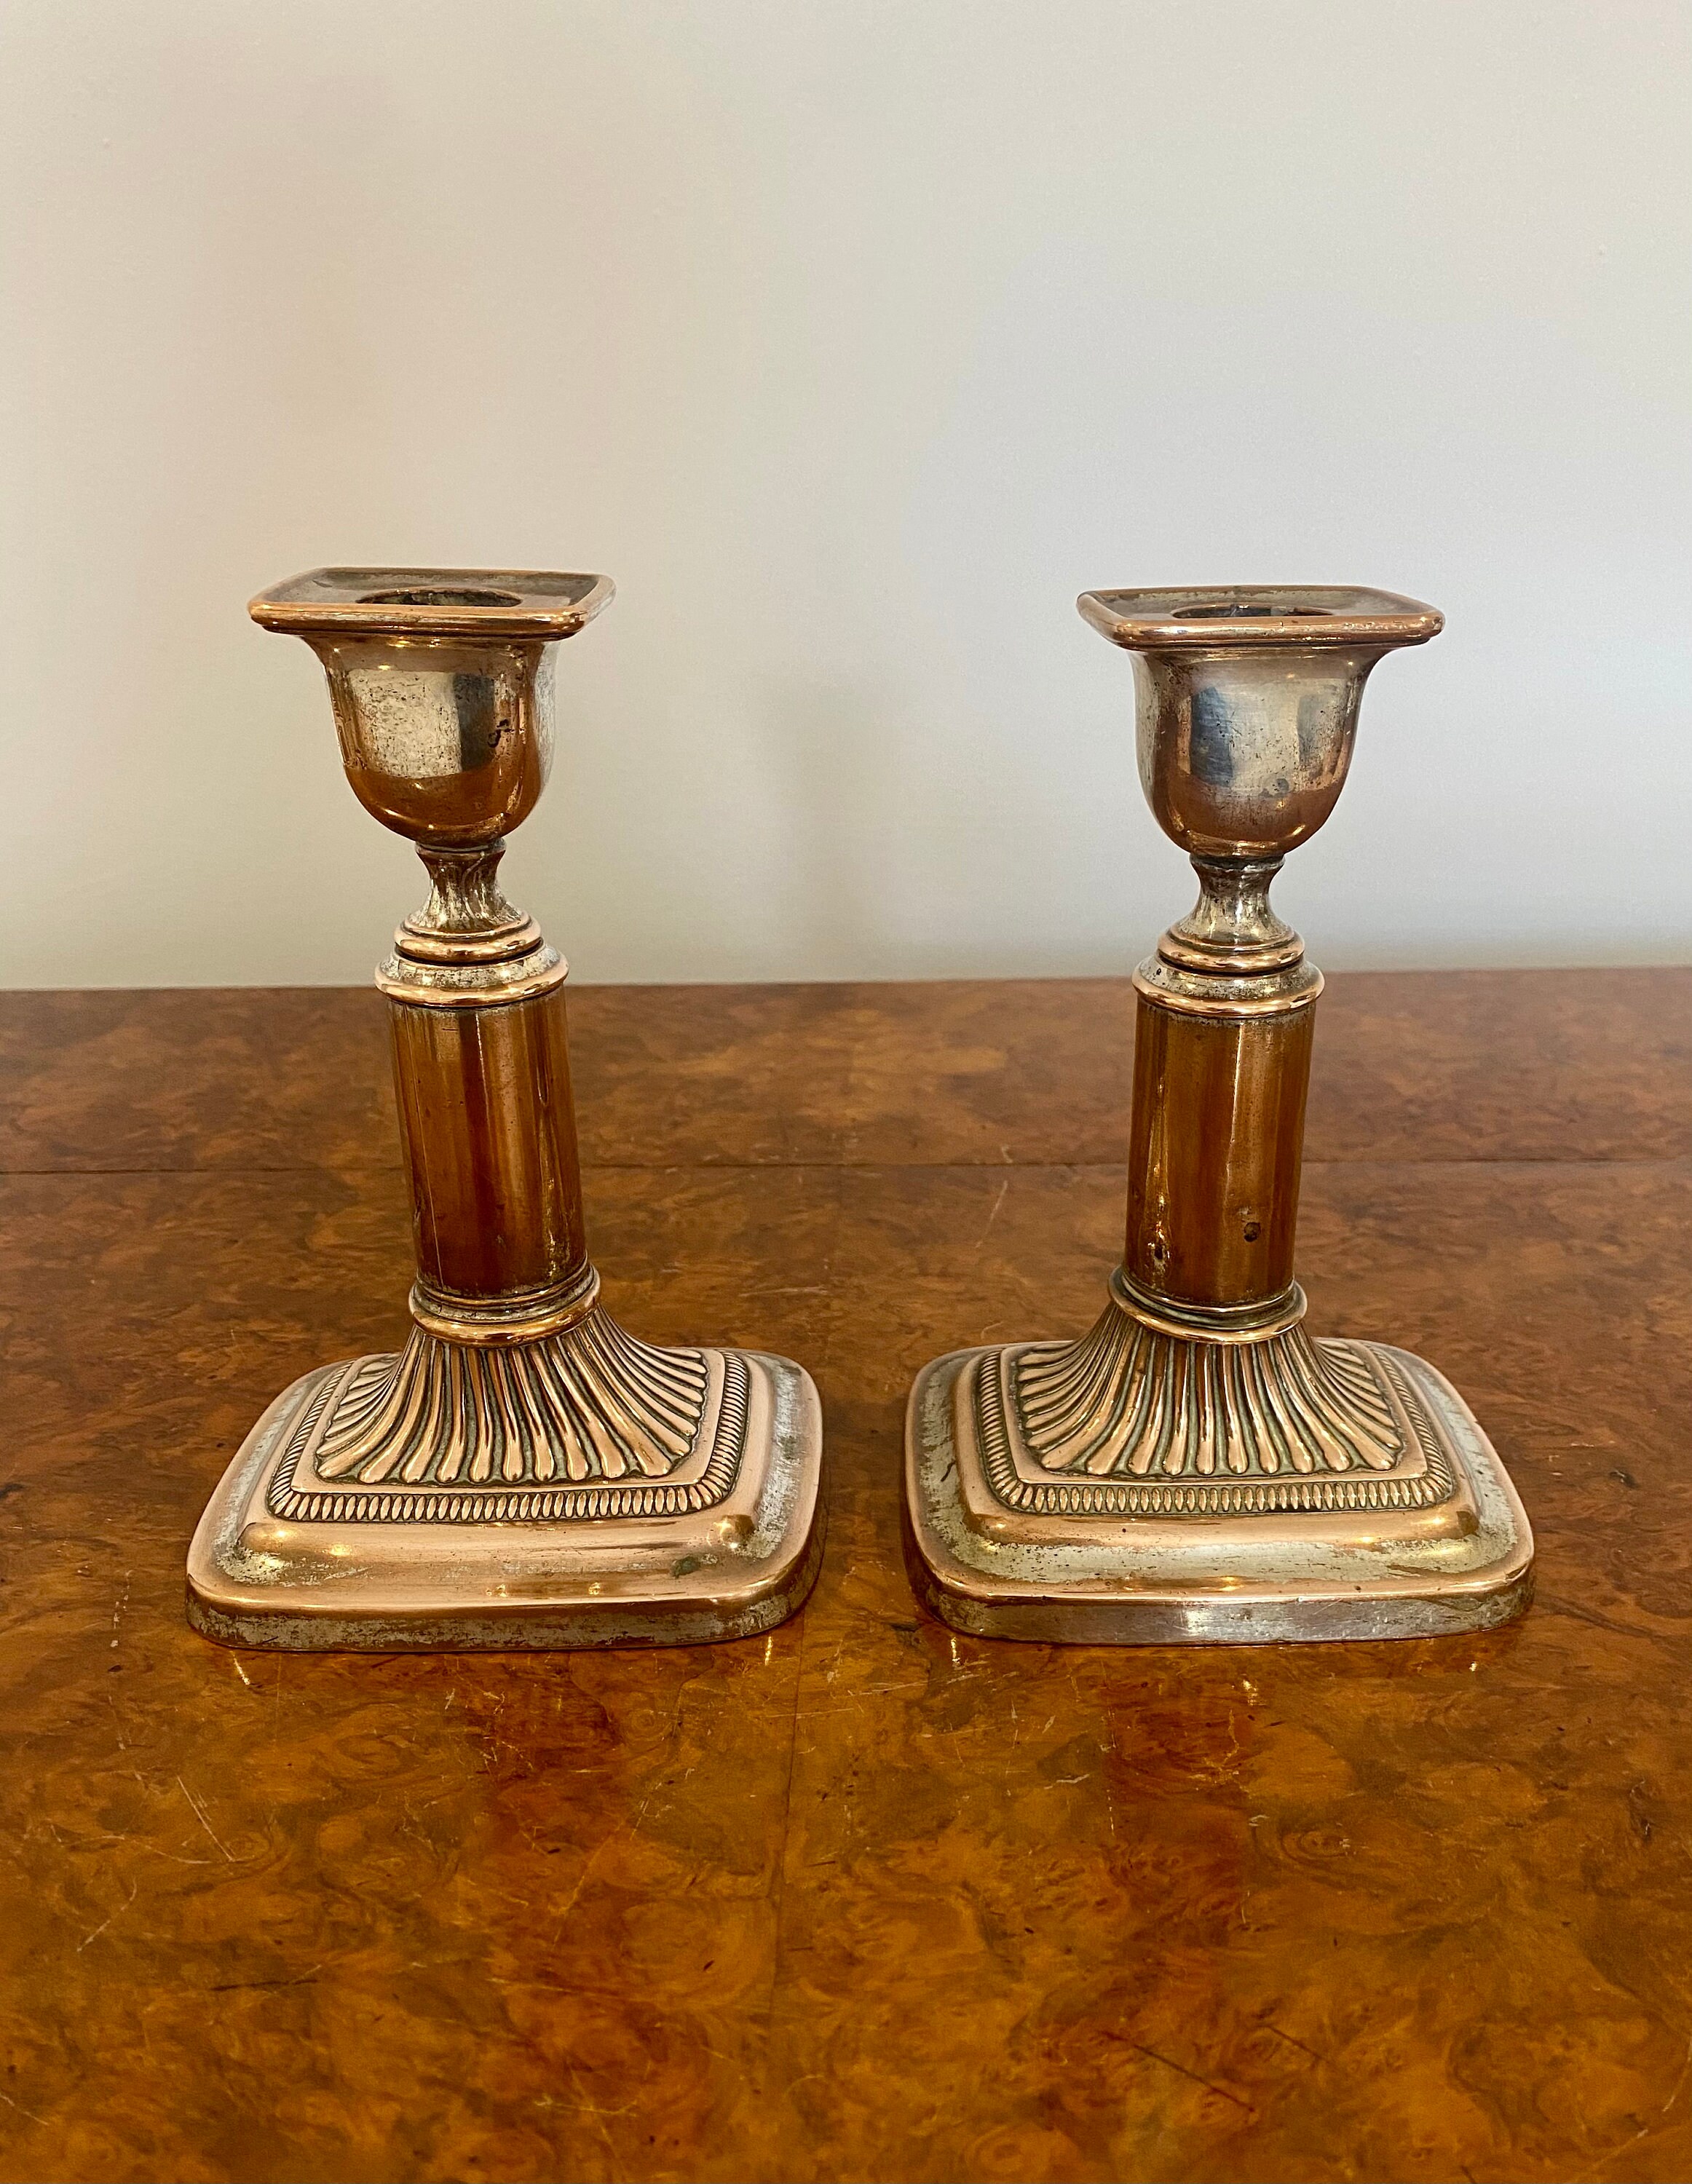 Pair of Early 19th Century Old Sheffield Plate Candlesticks by